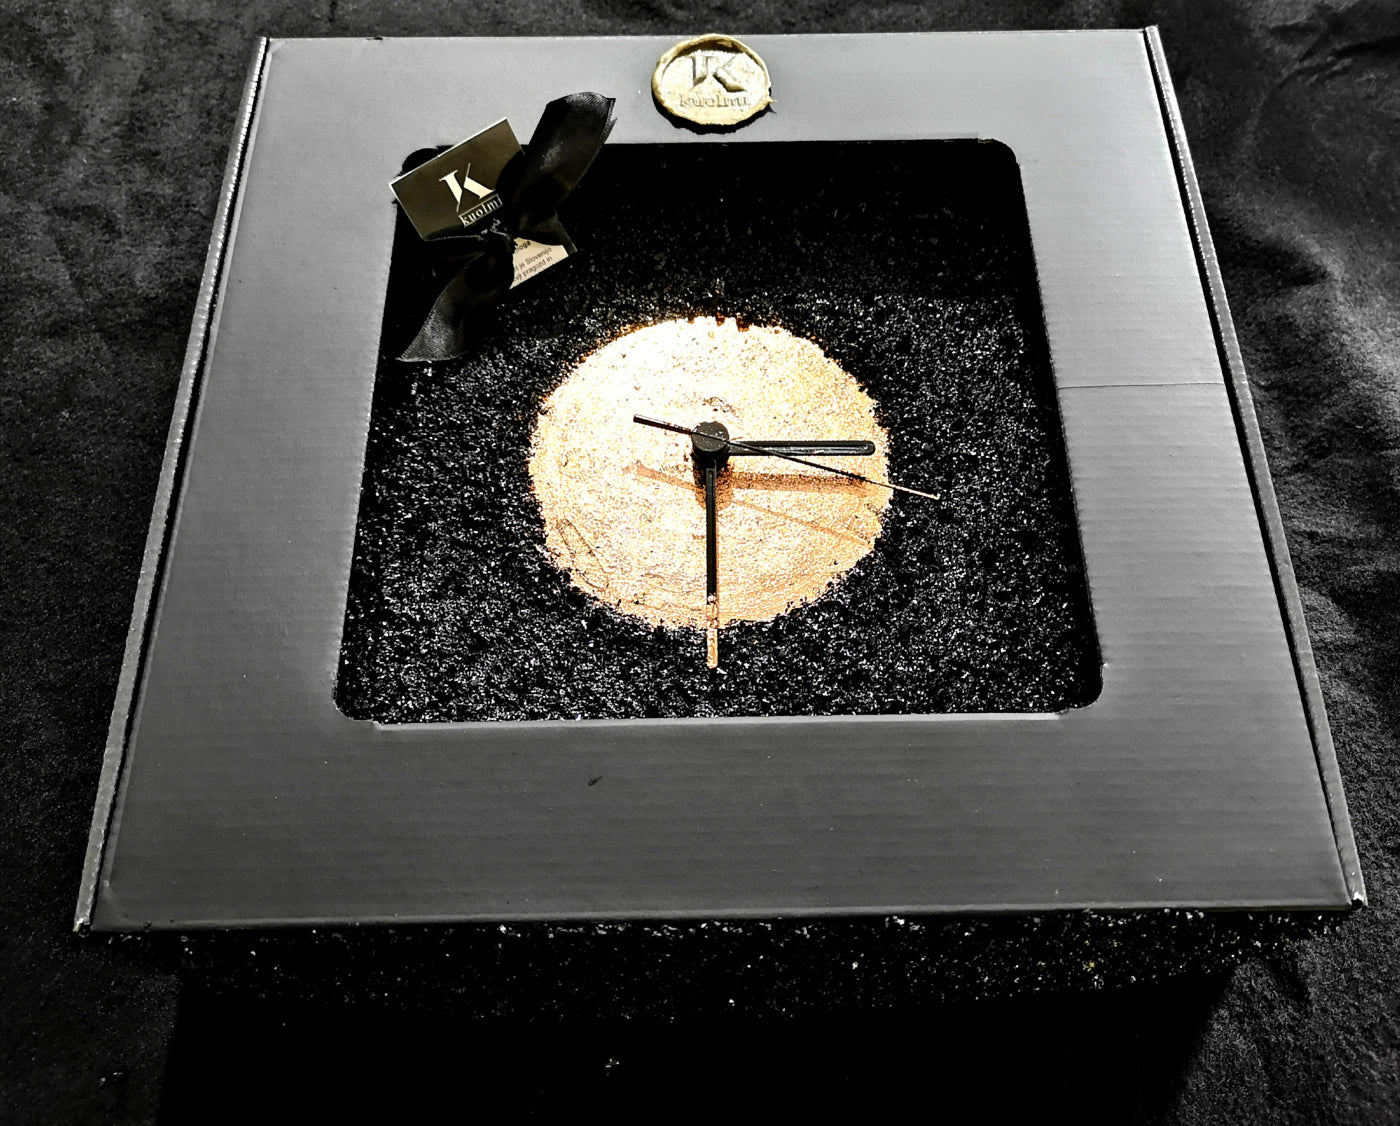  The watch is a fantastic gift with high usefulness aOur reclaimed watches are all unique: coal gives each watch a distinctive and unique character. Due to the simple design and the quiet movements, they are both beautiful and practical.  If you are looking for a unique gift for weddings, birthdays, for a dear contemporary, or a new beginning, make this watch a creative stroke of luck.  